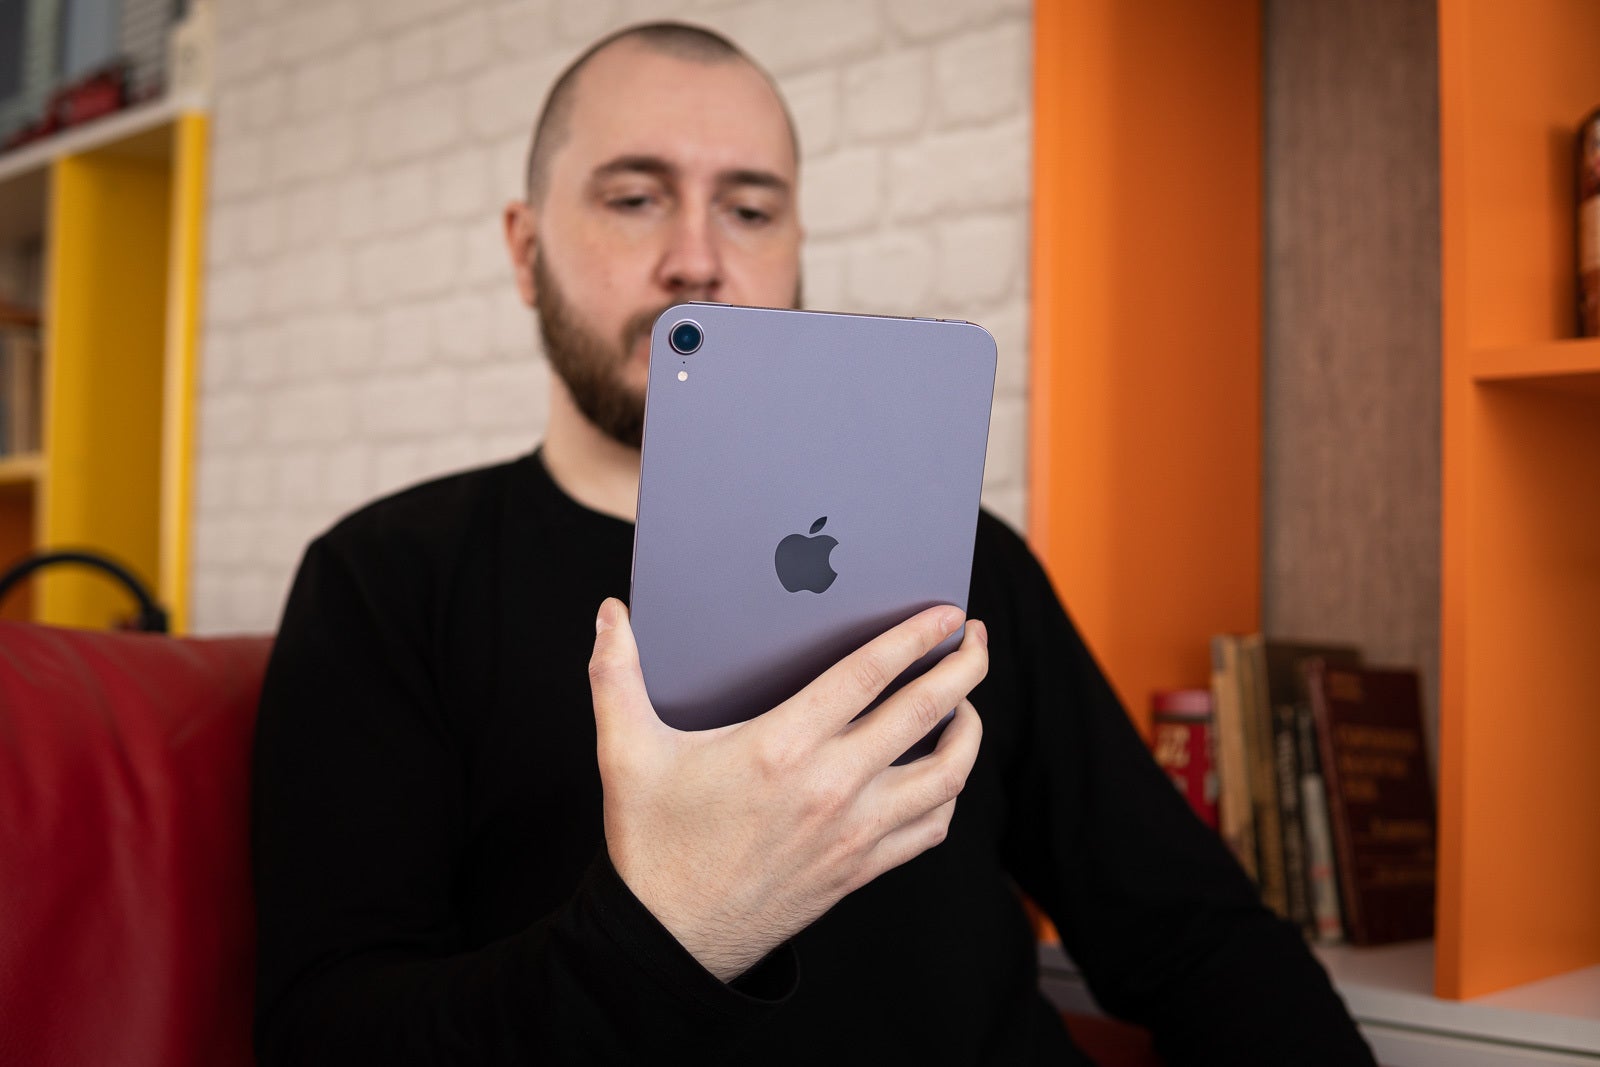 Allegedly, jelly scrolling makes the iPad mini 6 unusable - Apple is now facing a class-action lawsuit because of the iPad mini 6's jelly scrolling